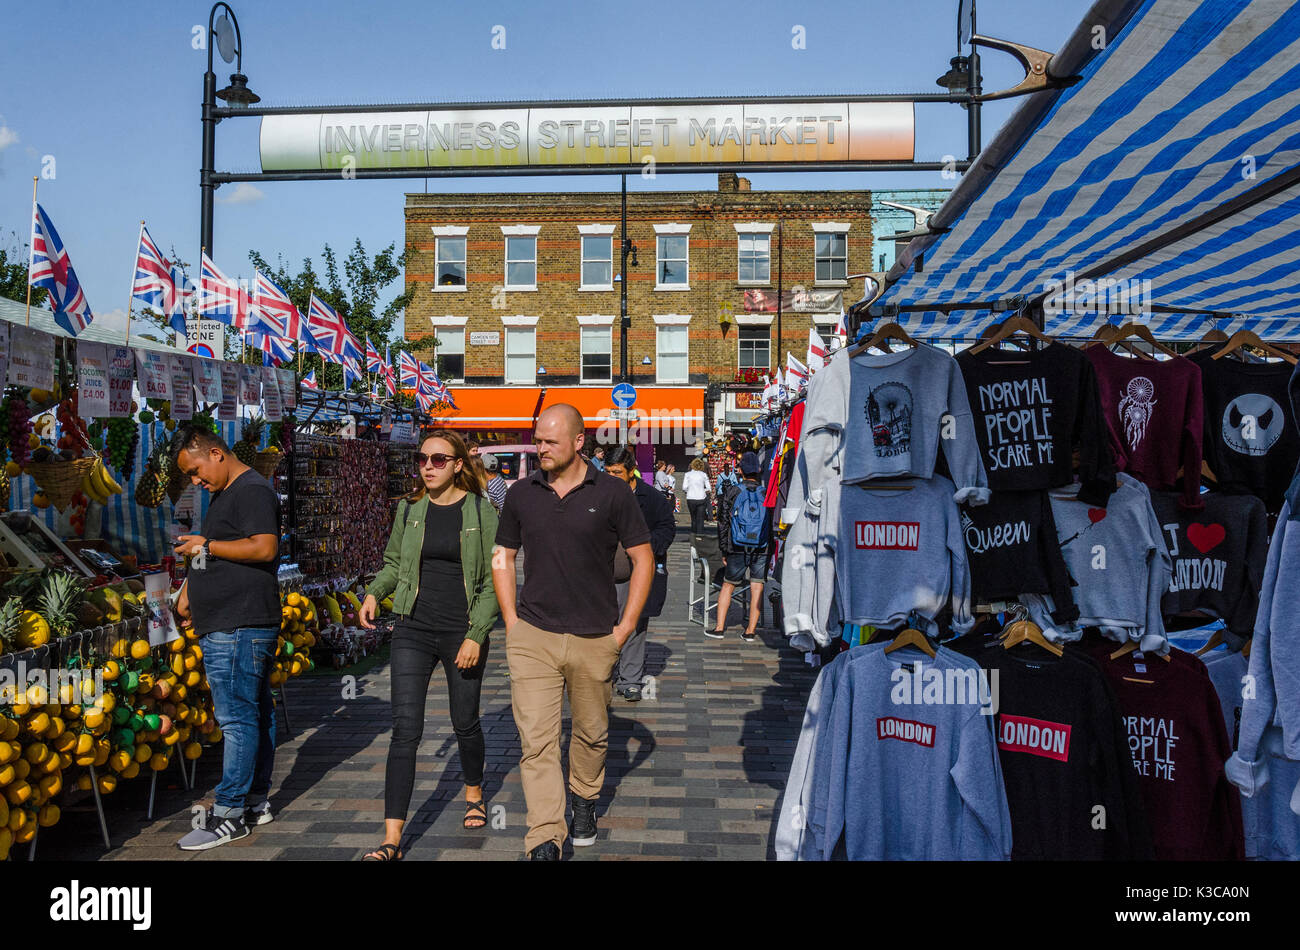 People wander through Inverness Street Market in Camden Town, London. Stock Photo